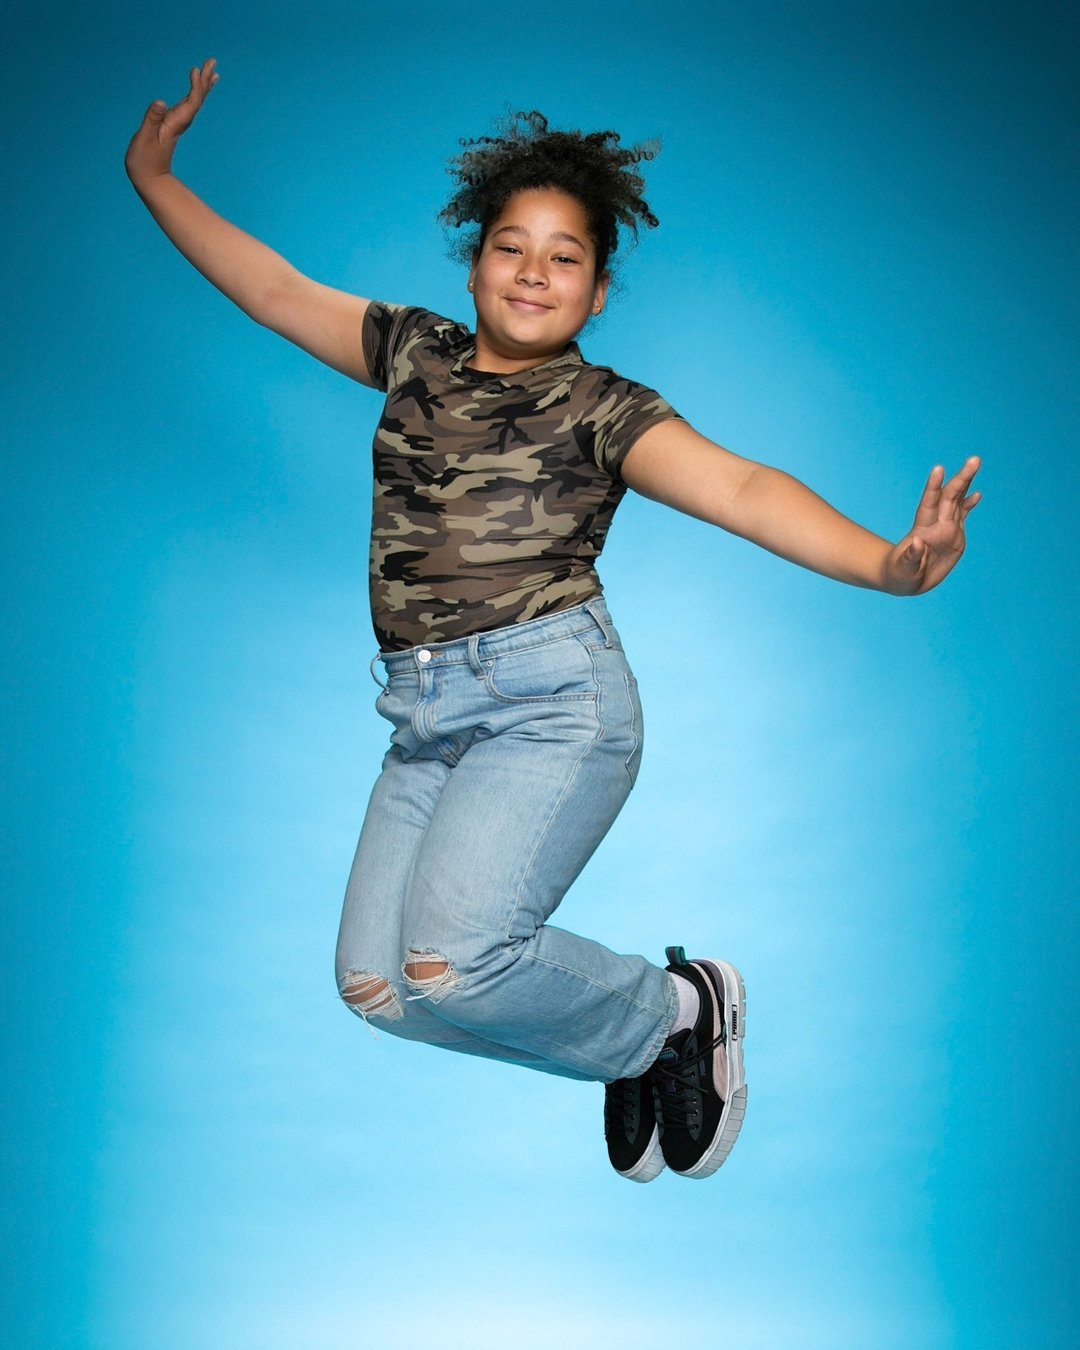 Camouflaging the Monday blues with some serious jumping skills!🚀🚀
Who says Mondays have to be dull? 🎉💙 

#JumpingIntoMonday #CamoMagic 
#schoolpictures2024 #schoolpics #schoolpictures #earlybird #nycschools #nycpublicschools #nyccharterschools #T